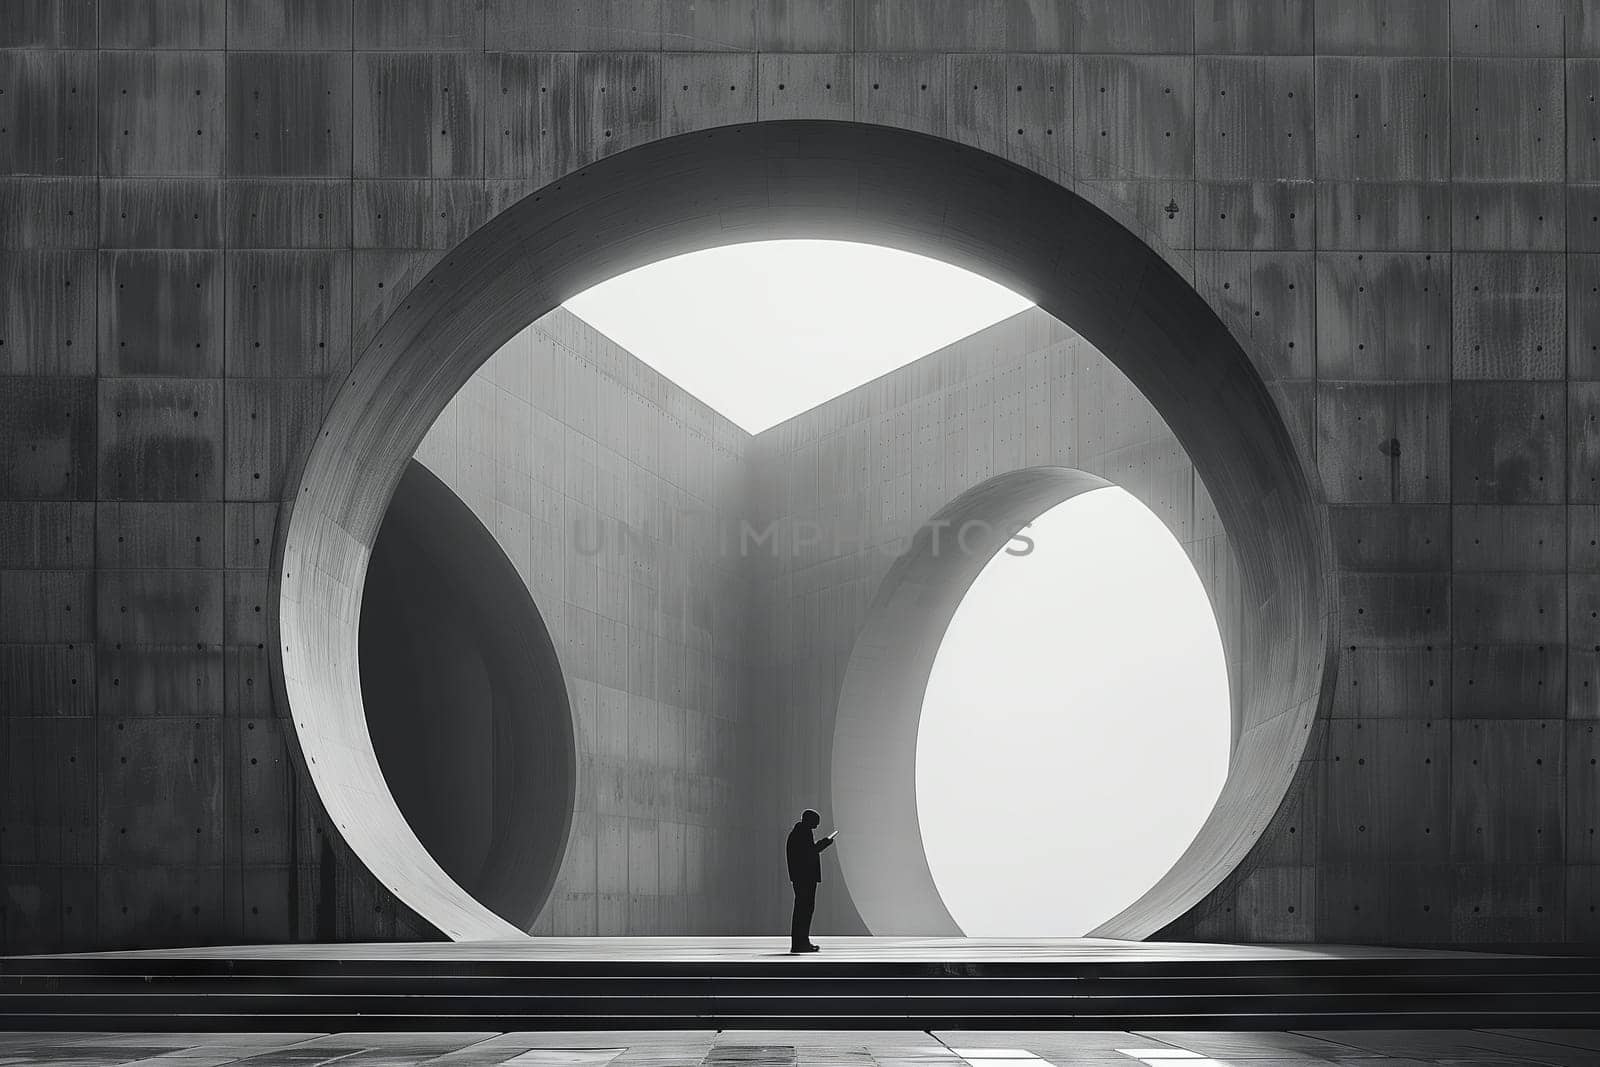 Monochrome image of a man by a large circular archway by richwolf